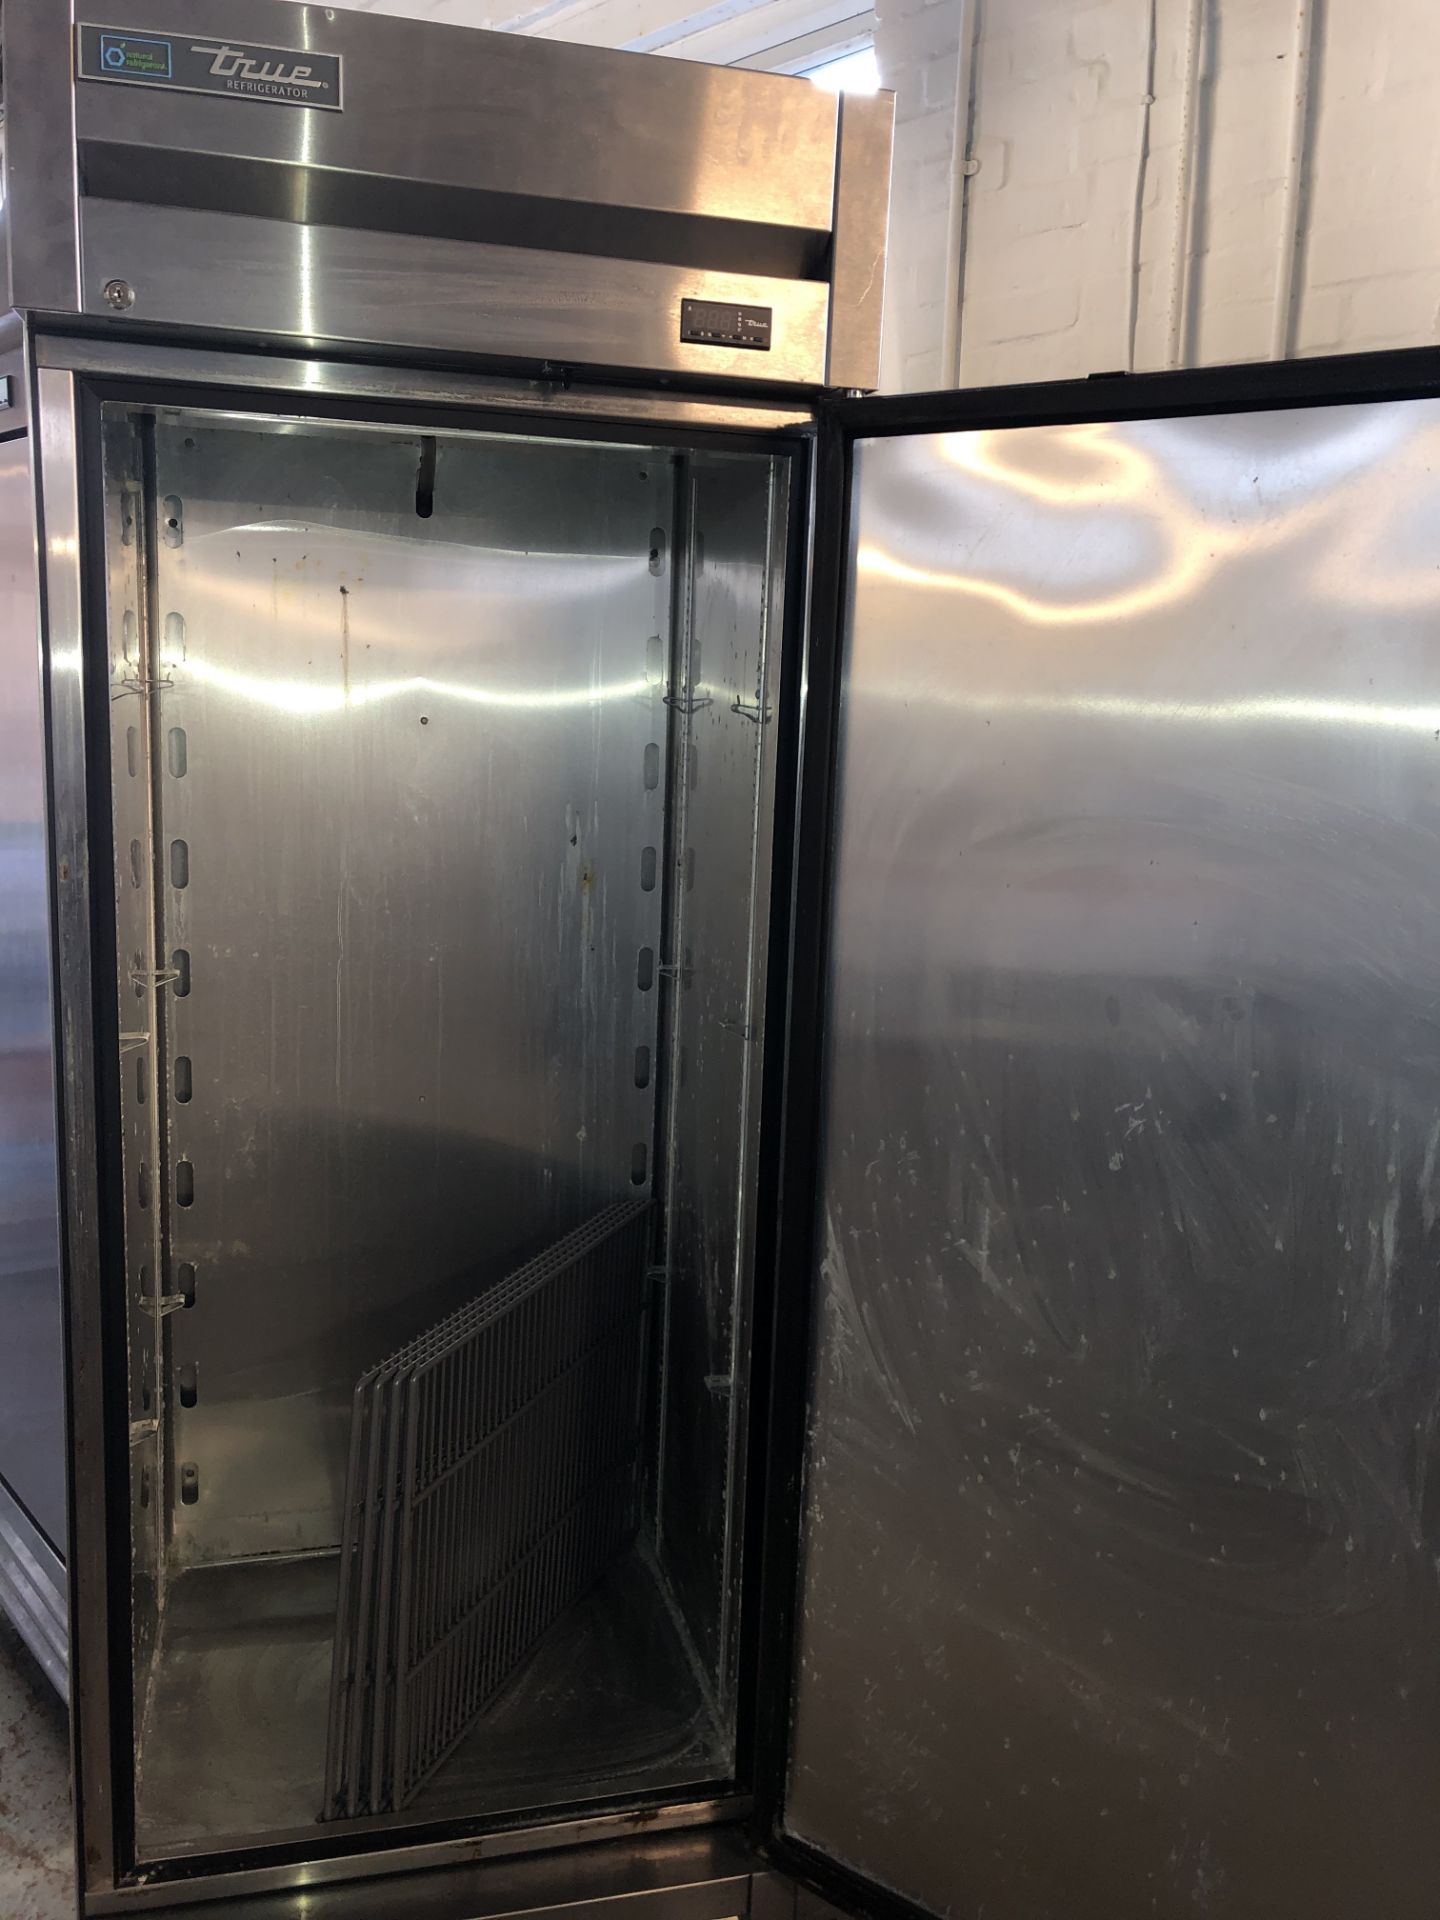 True Refrigeration T-19E-HC Upright Commercial Stainless Steel Fridge - Image 4 of 4